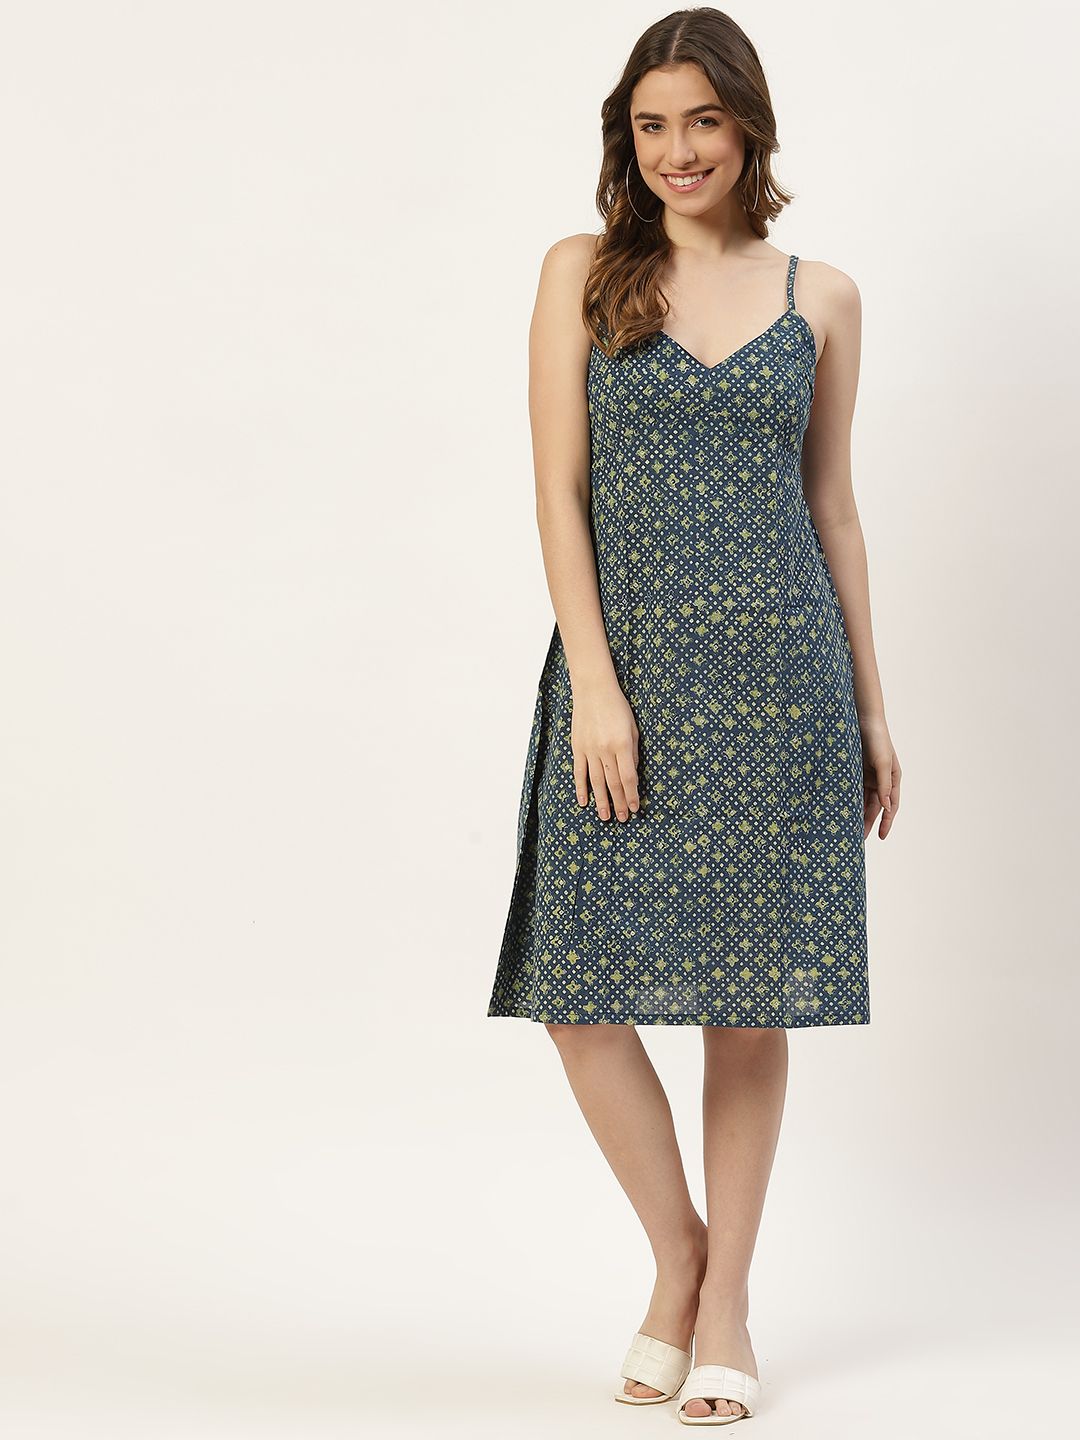 Molcha Navy Blue & Green Printed Cotton A-Line Dress Price in India